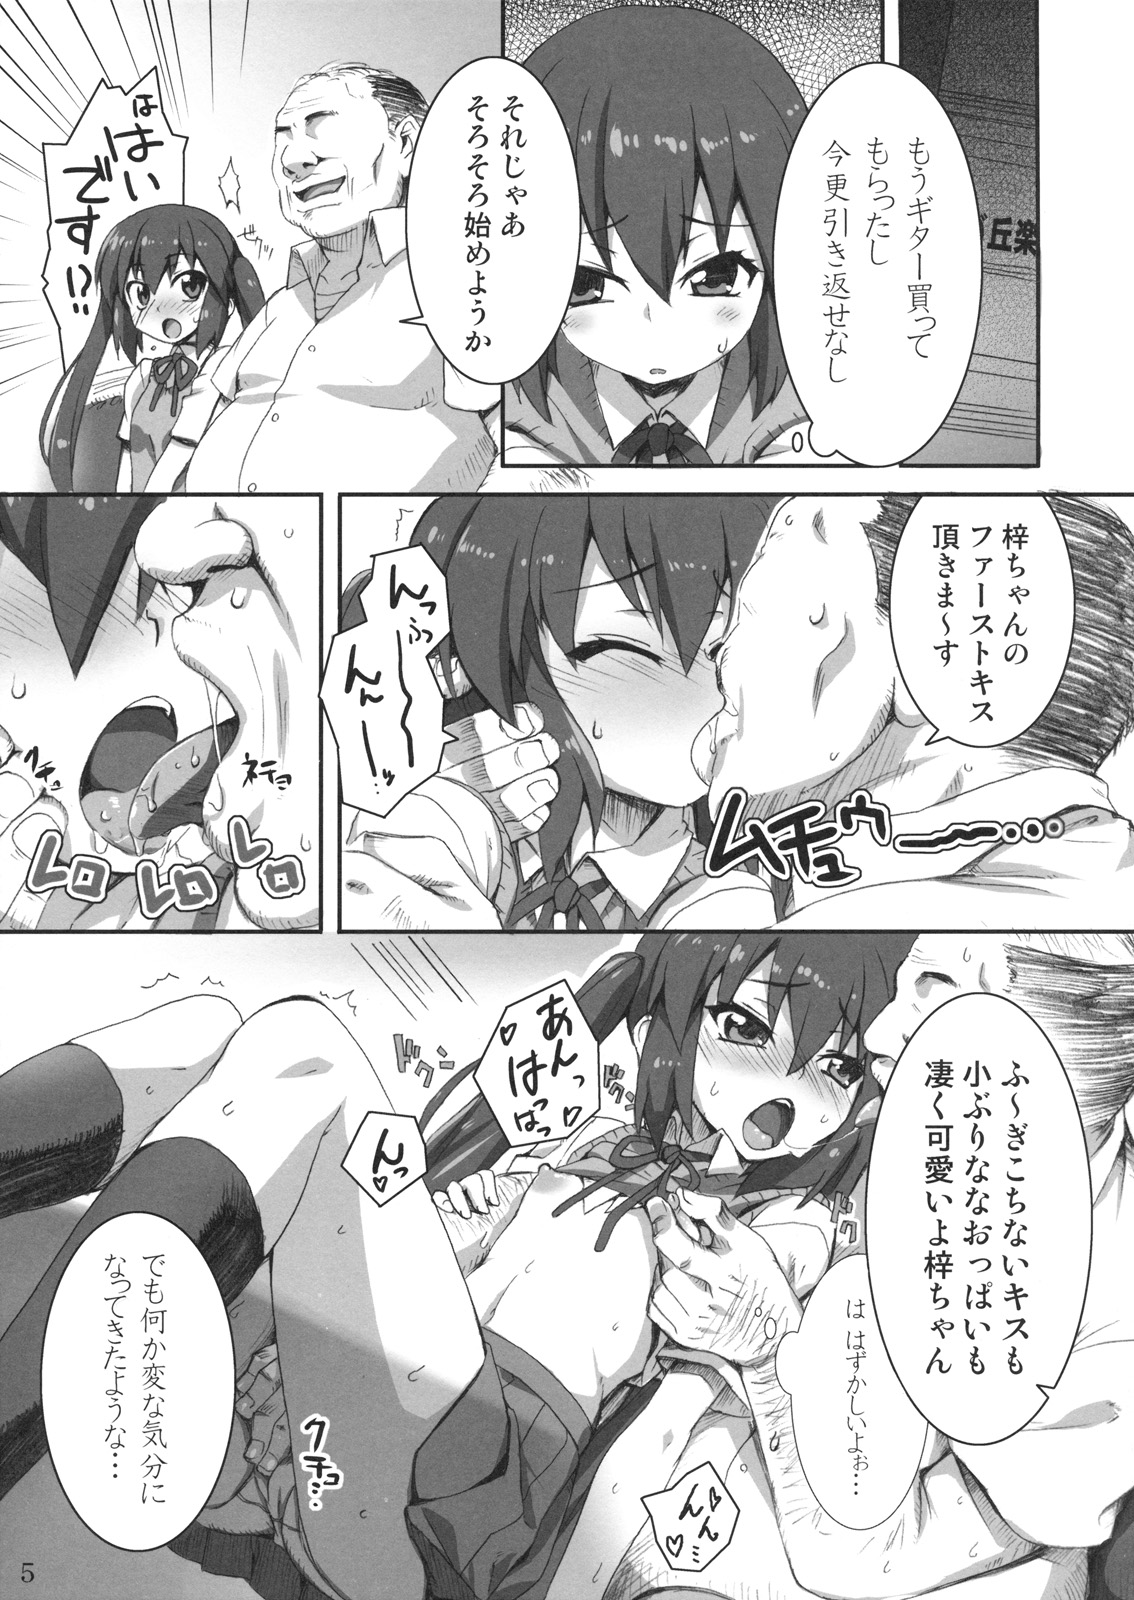 [SION (Hotori)] GirlsTuner (K-On!) page 5 full